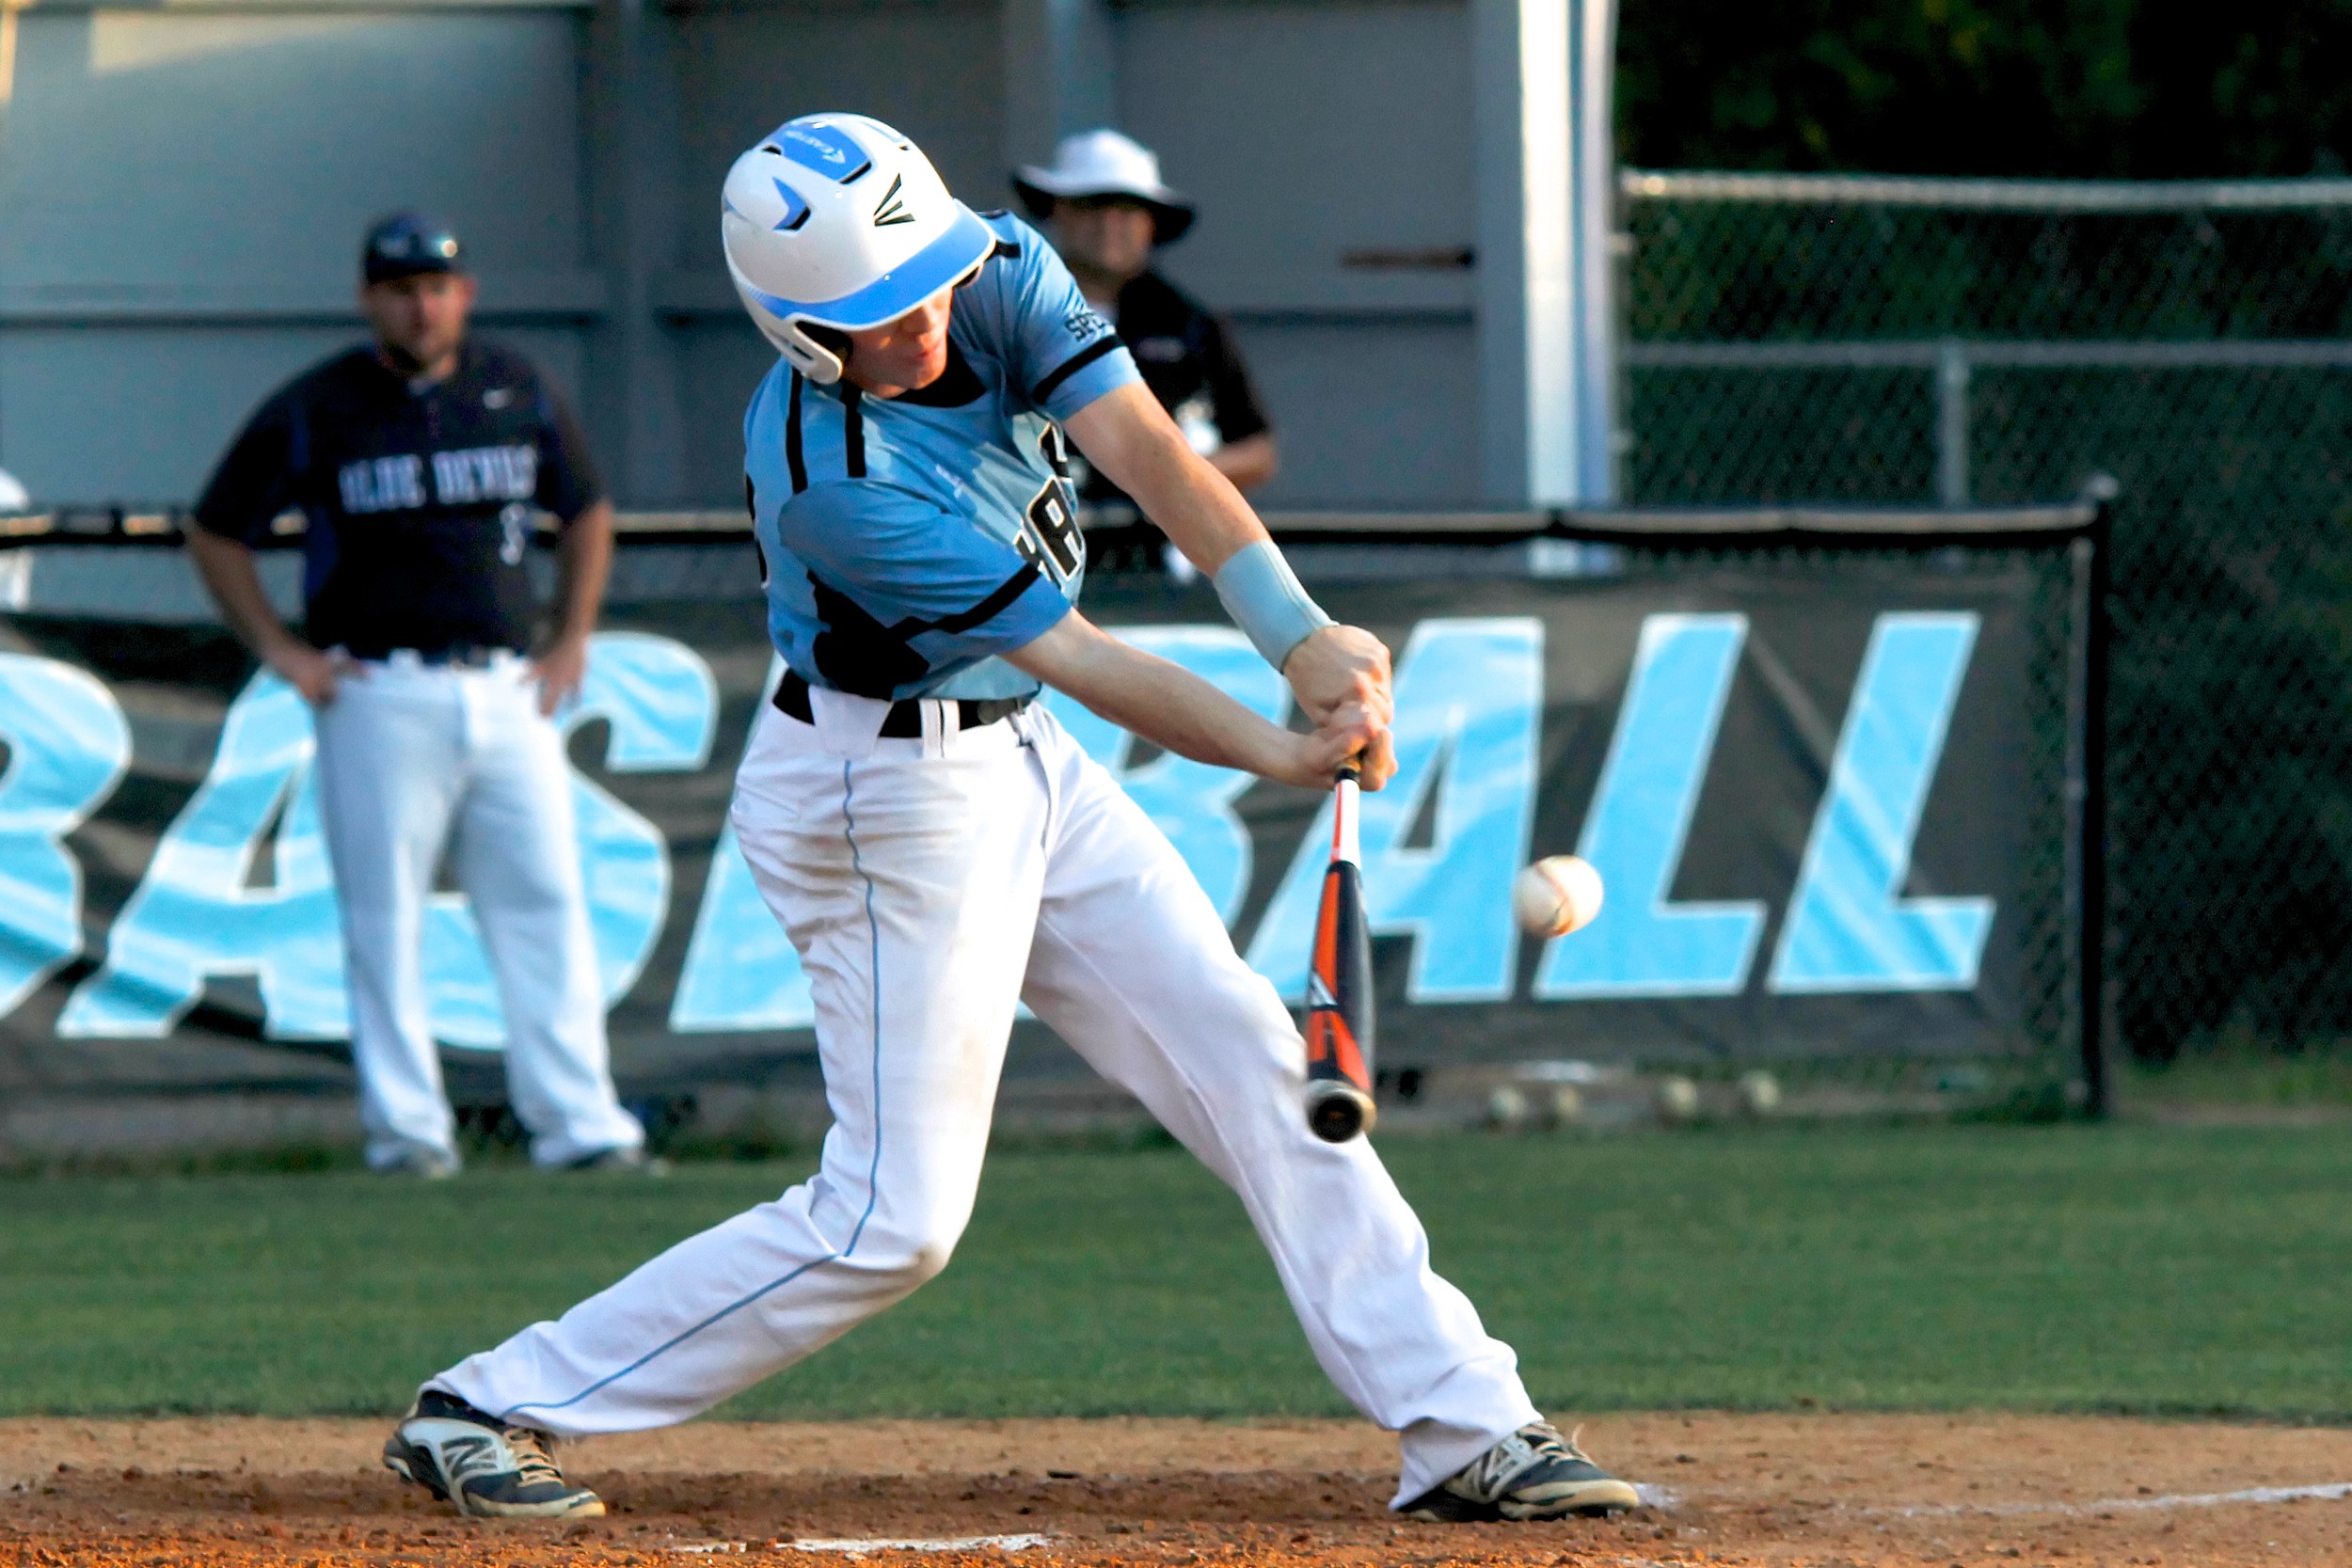 Shark catcher Kevin Mauro slaps a base hit to right for an RBI.